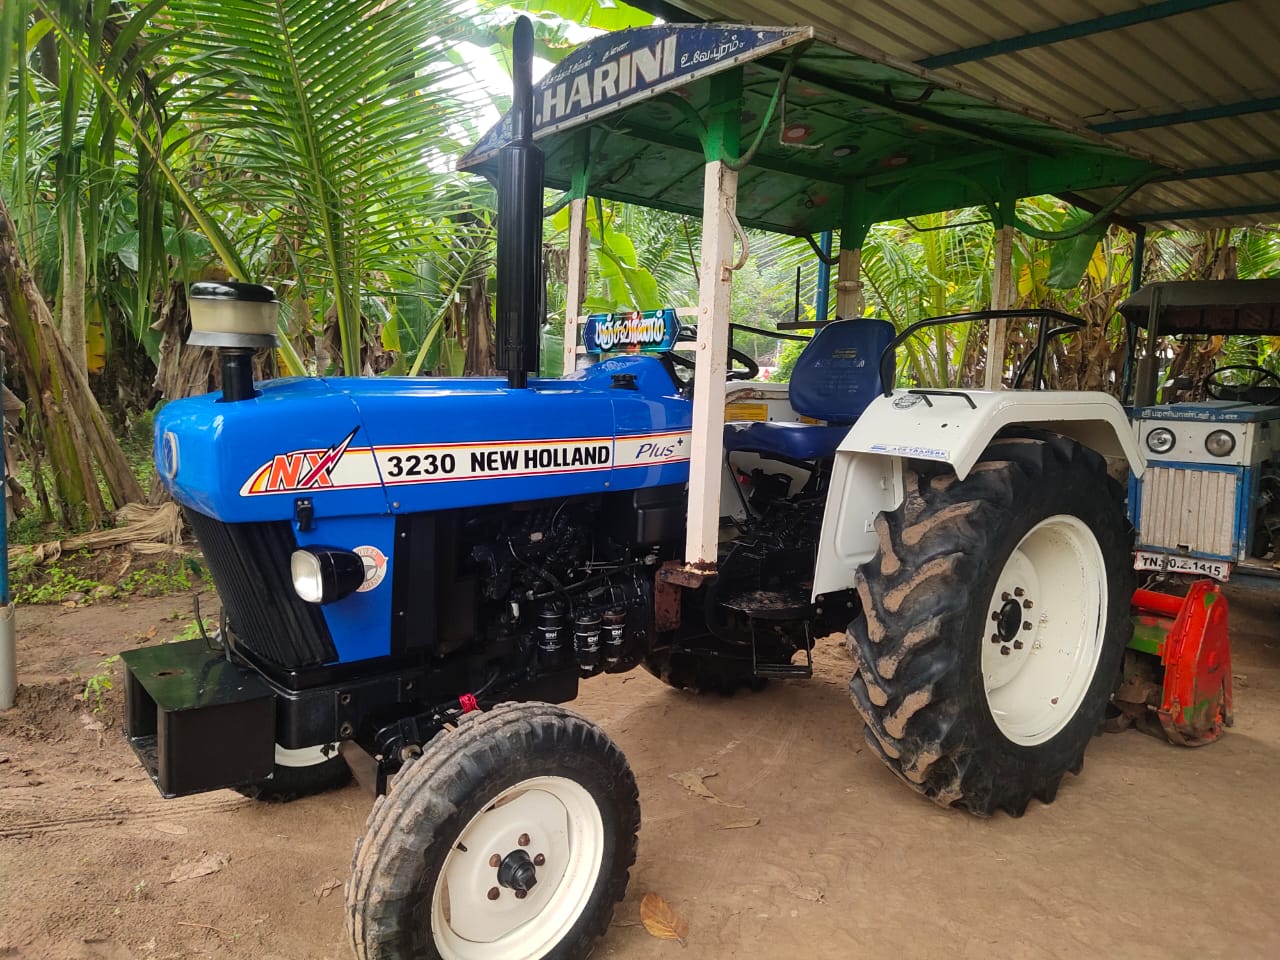 NEW HOLLAND 3230 MODEL 2019 With RORAVATOR SALES